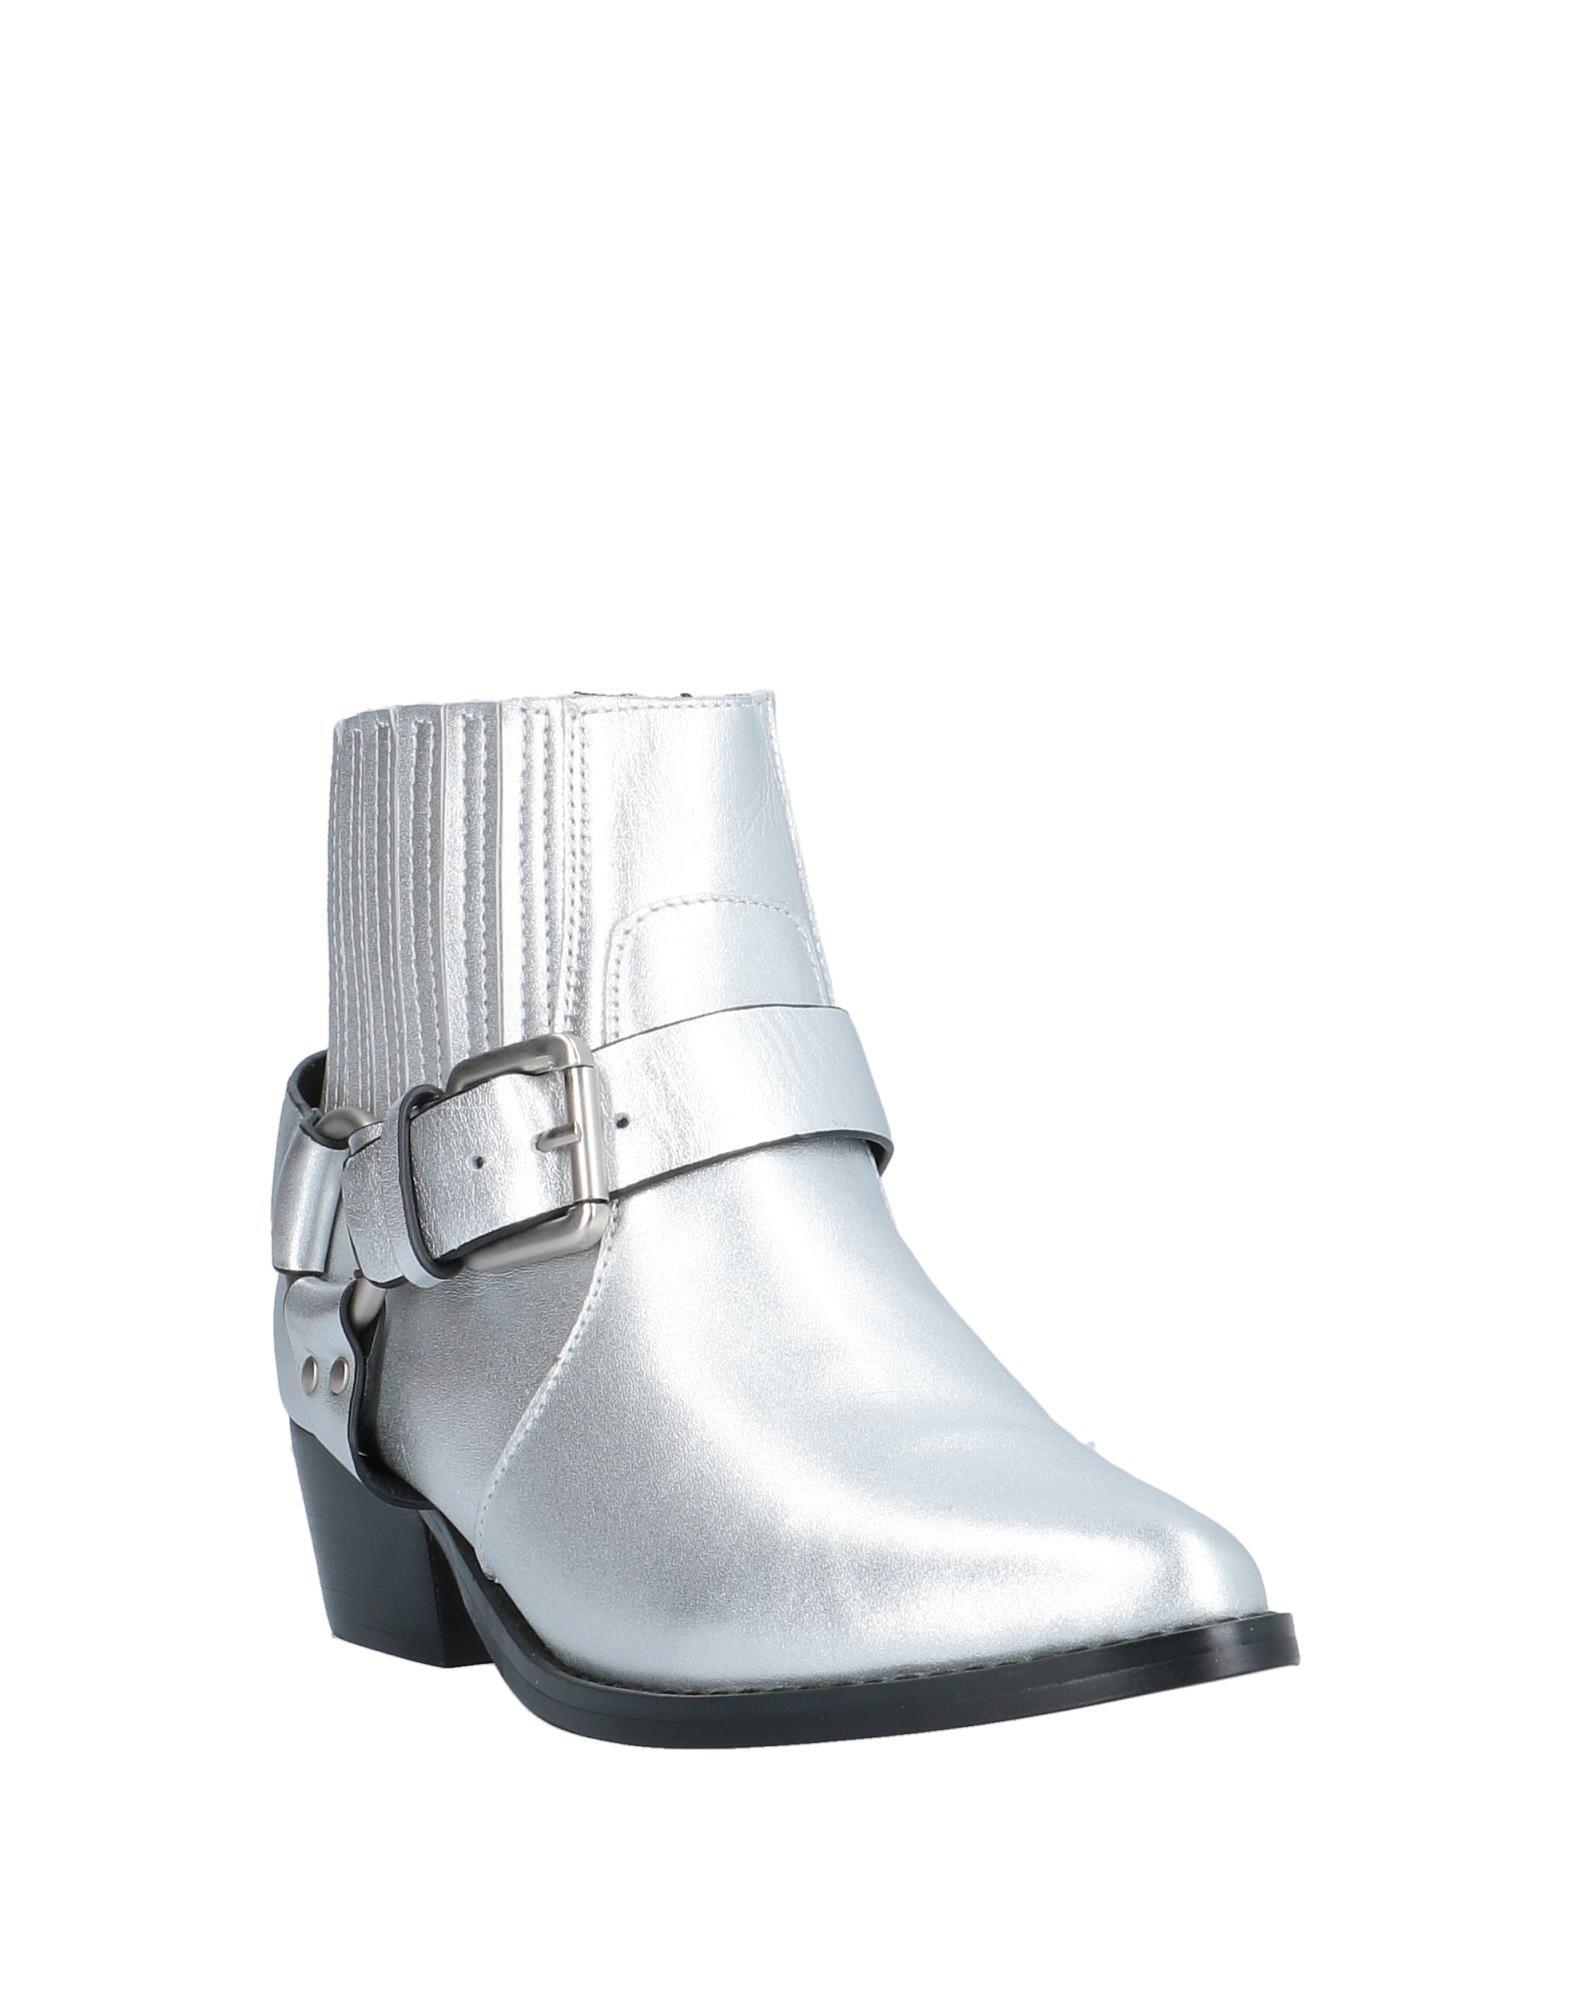 Bibi Lou Leather Ankle Boots in Silver (Metallic) - Lyst